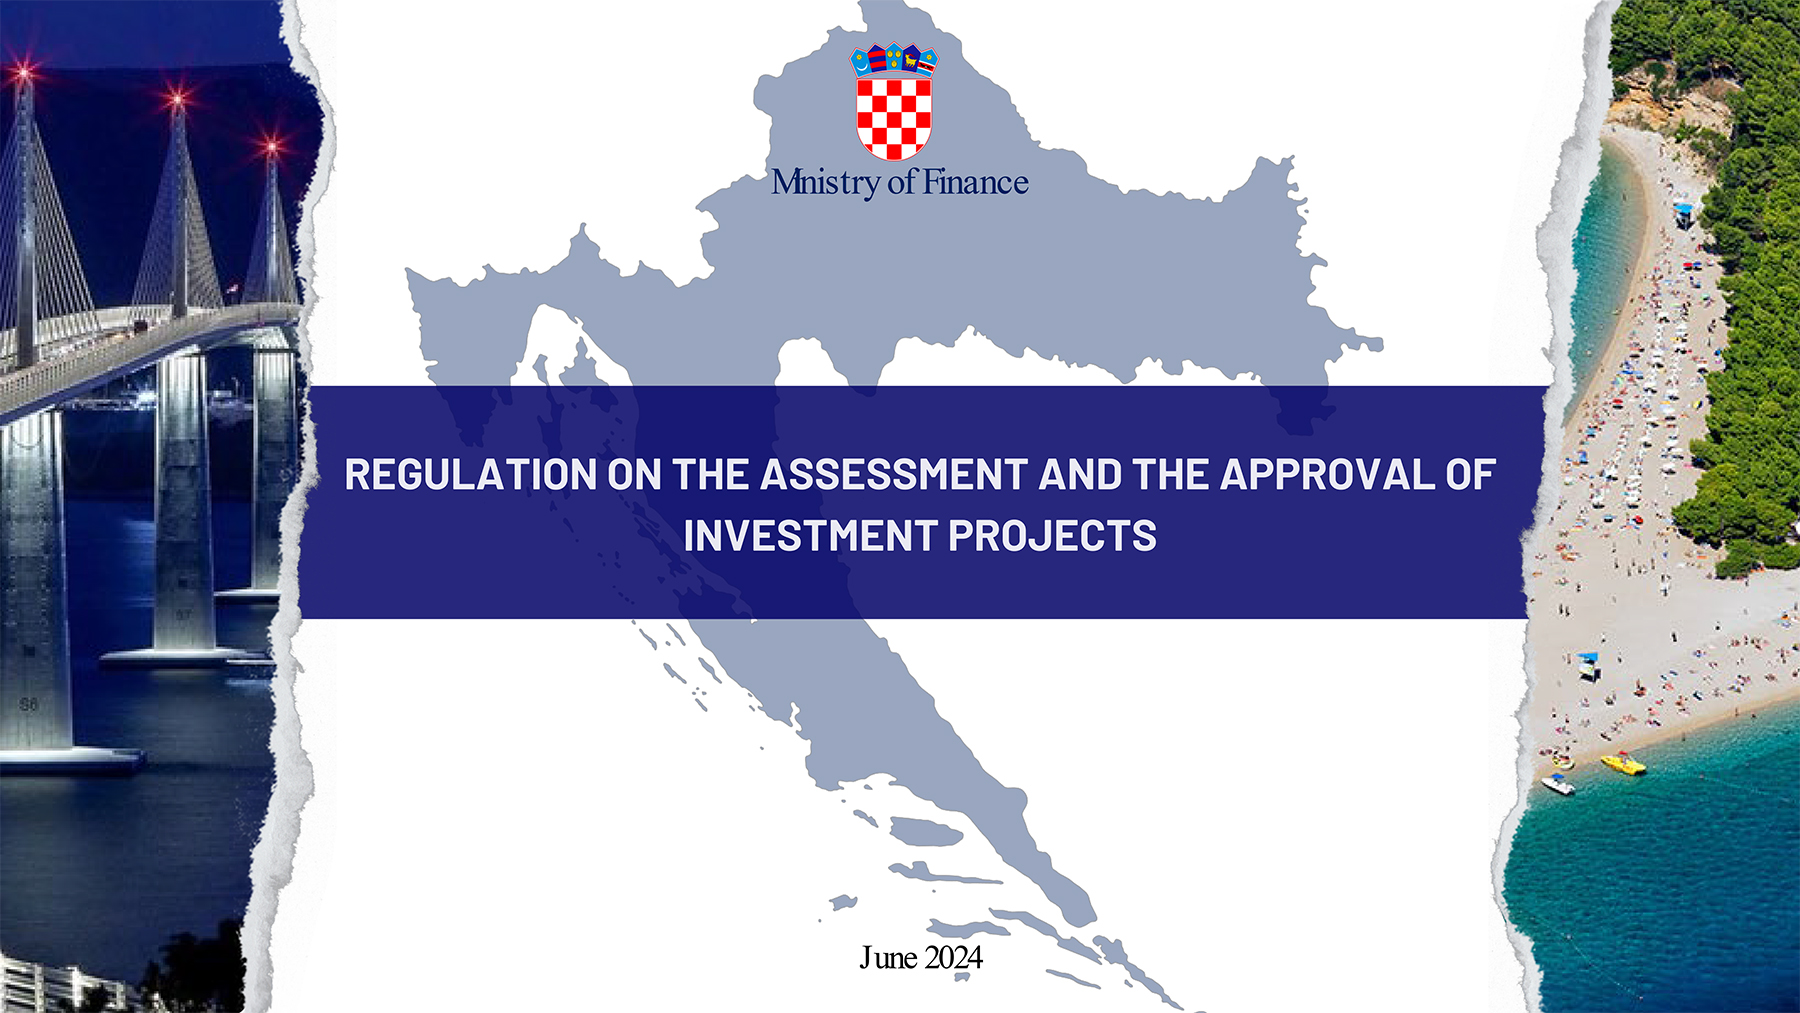 Regulation on the Assessment and the Approval of Investment Projects